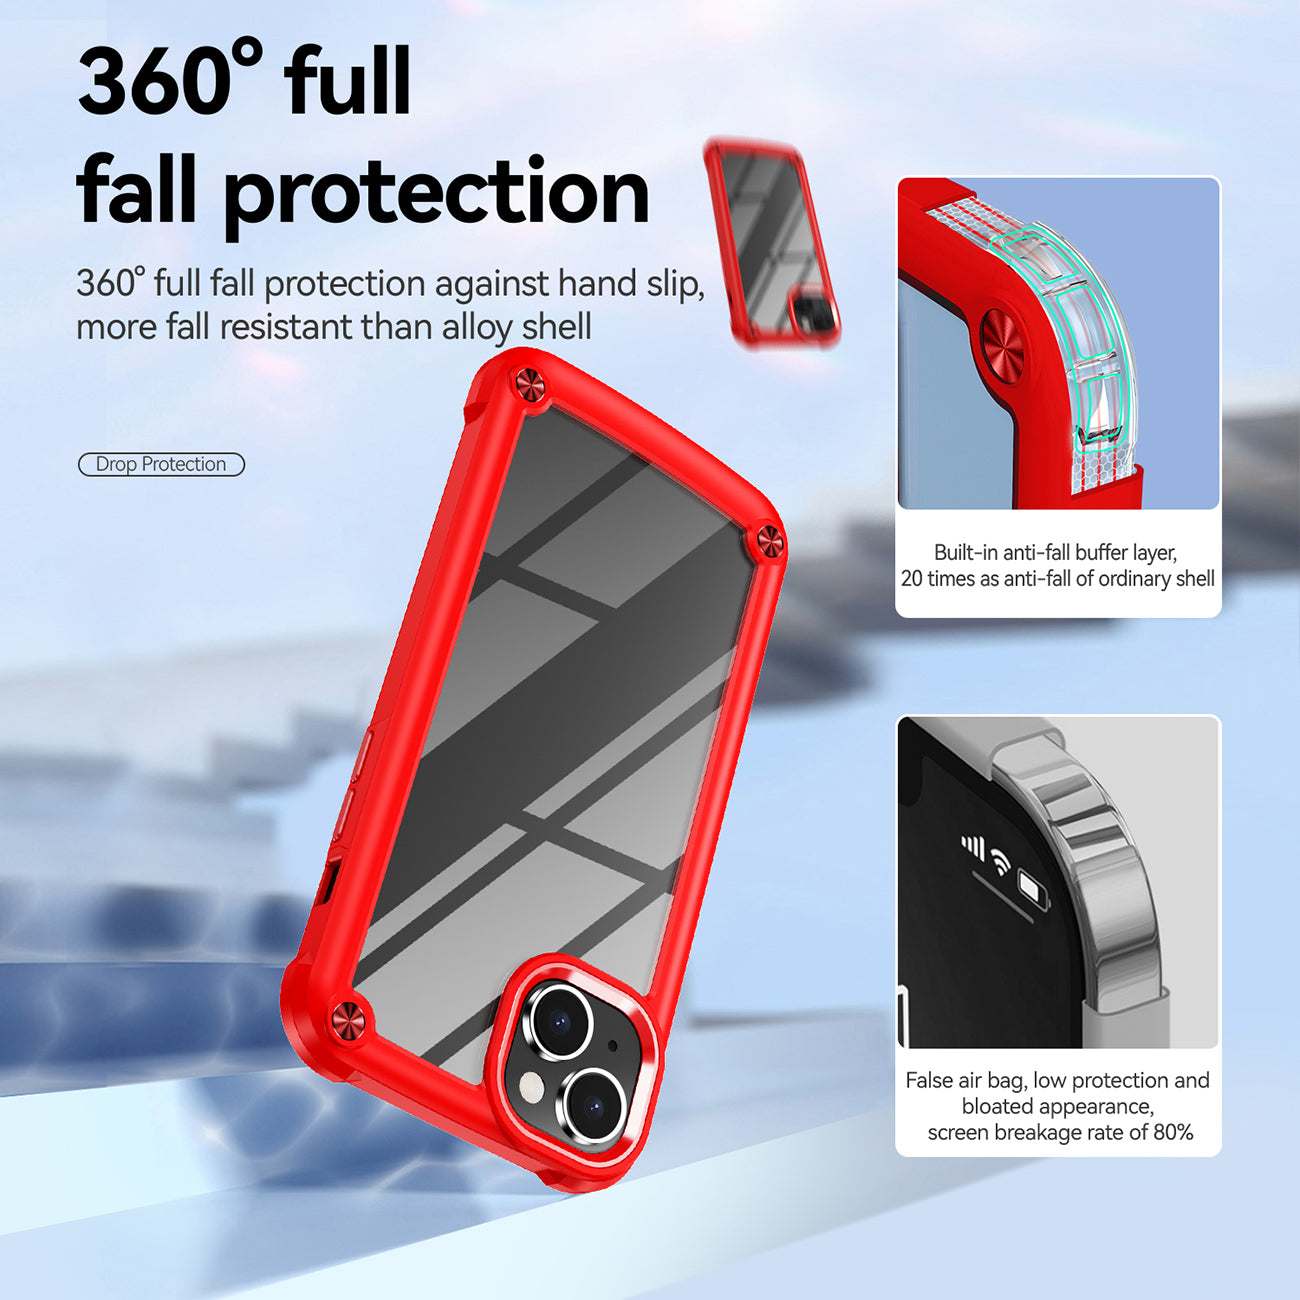 High Quality Clean PC,TPU and Metal Bumper Case For iPhone 14 In Red